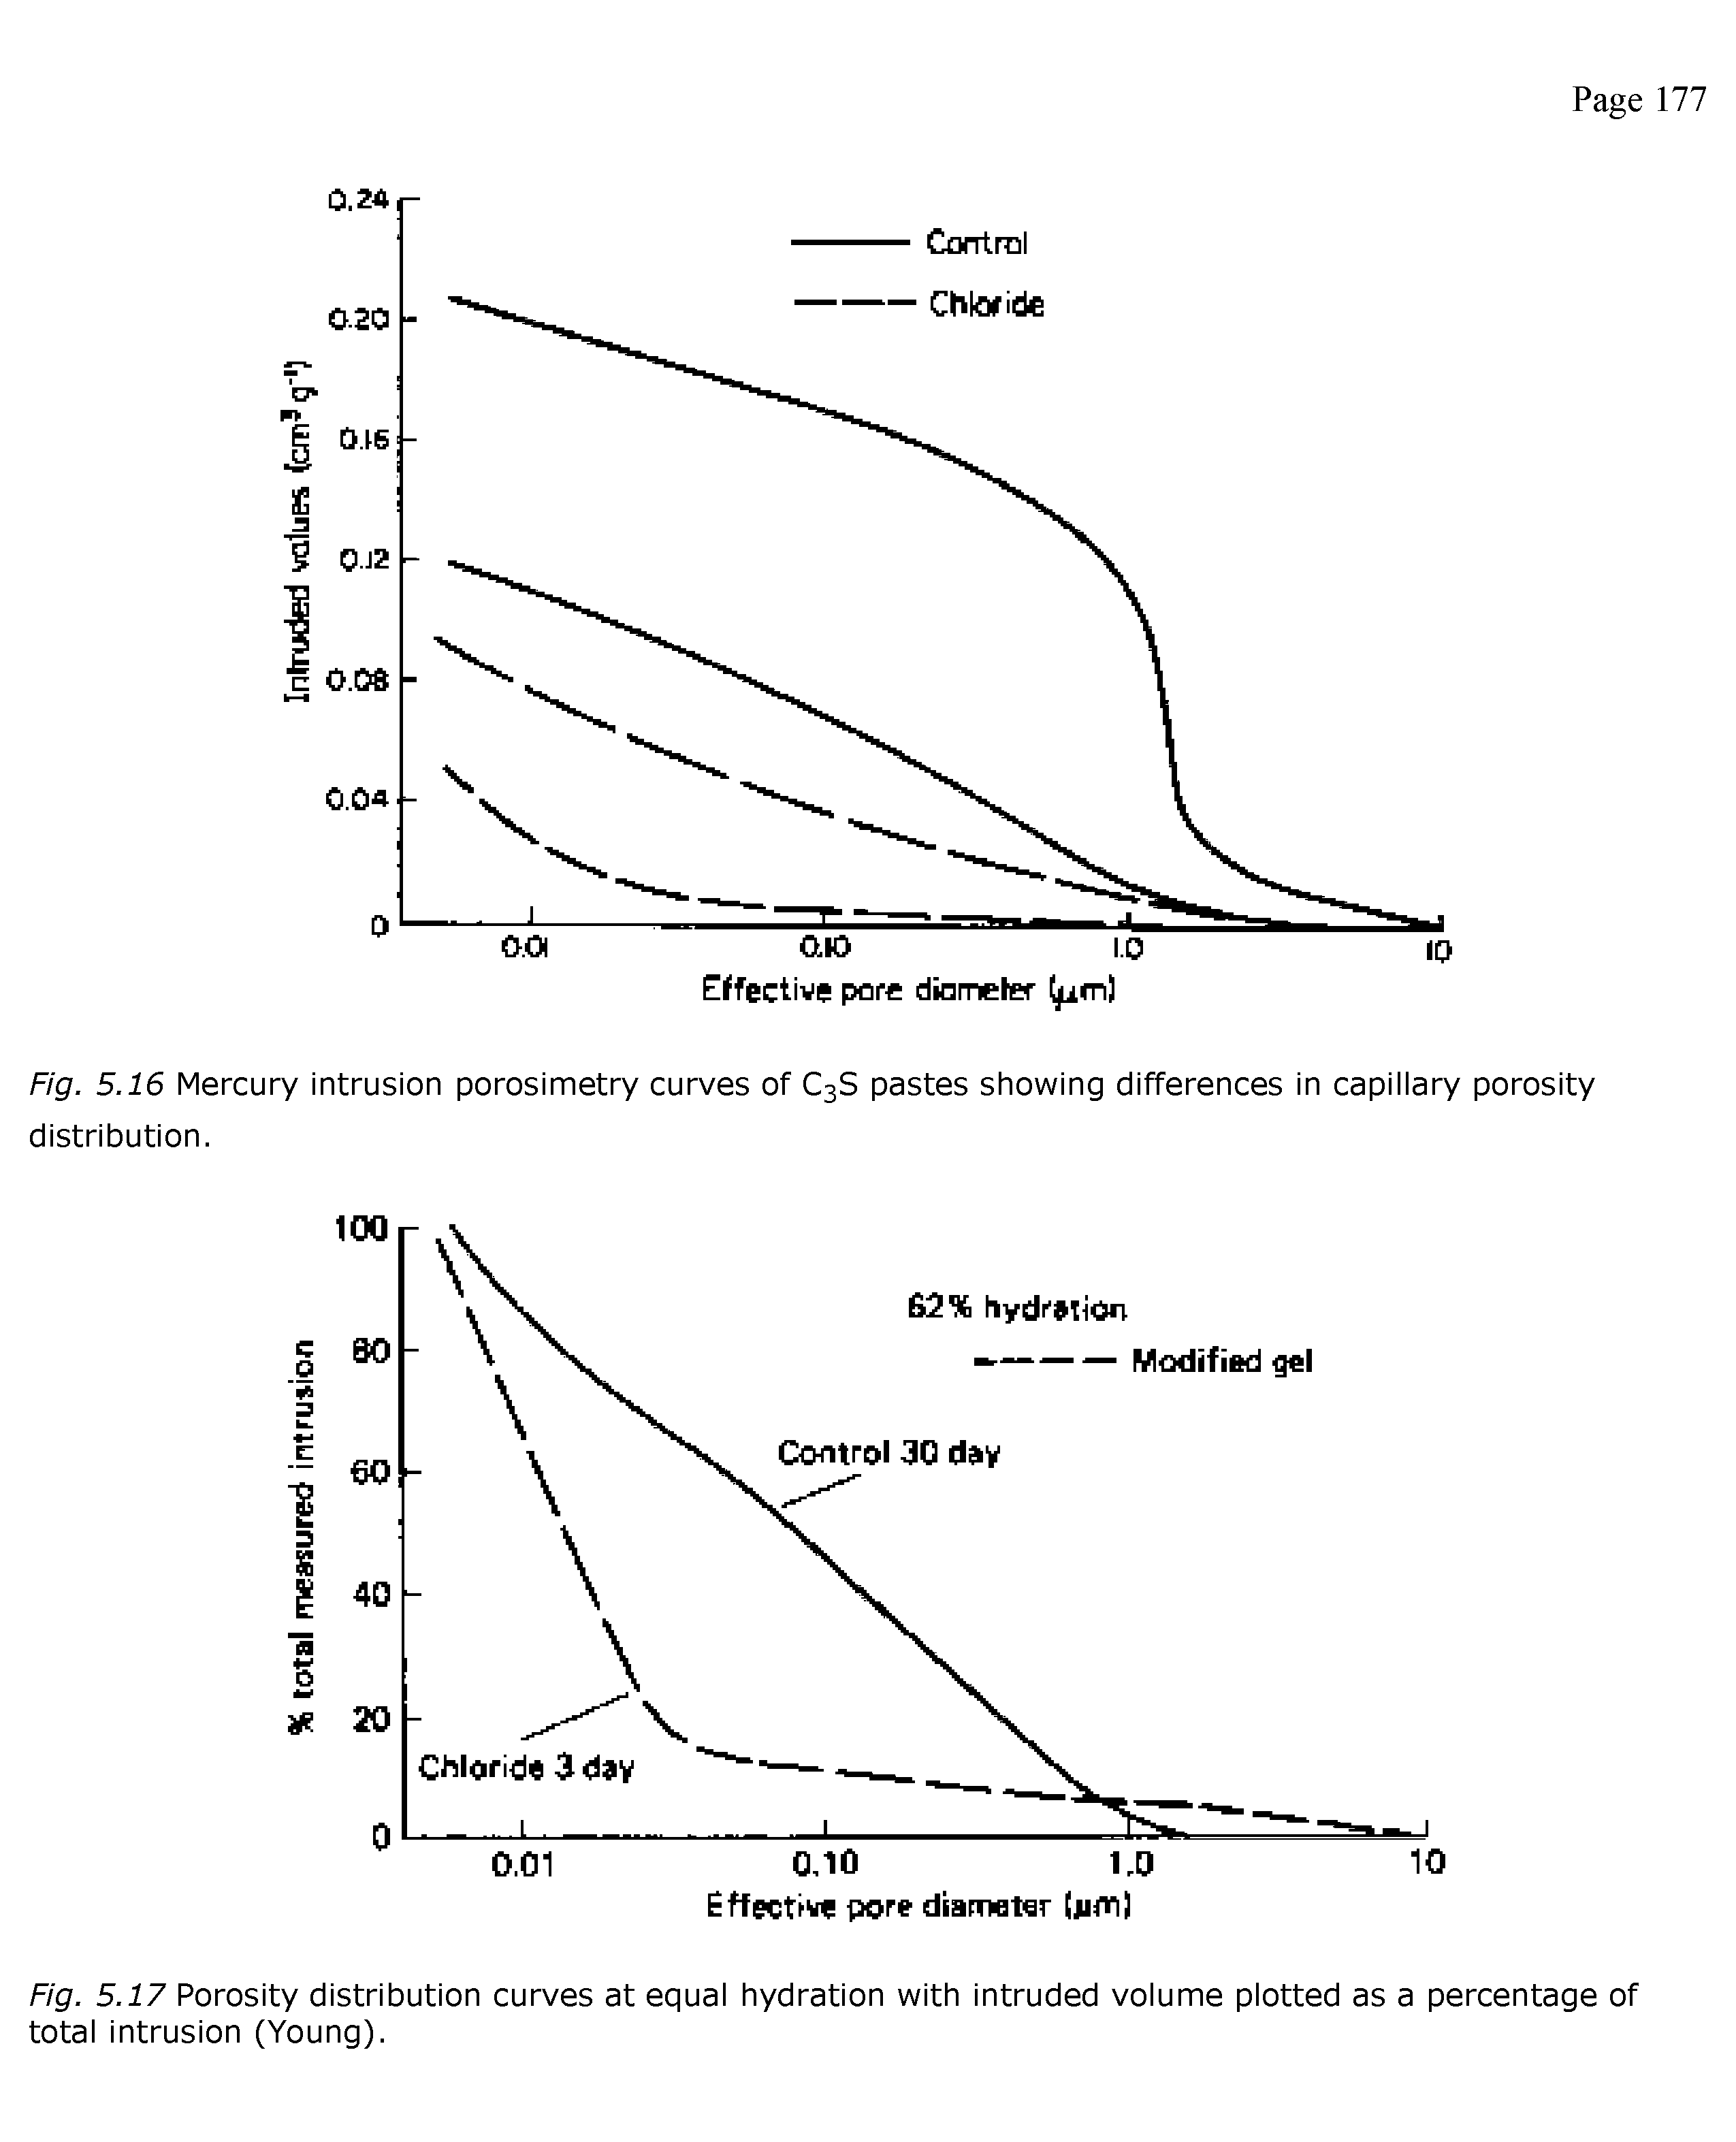 Fig. 5.17 Porosity distribution curves at equal hydration with intruded volume plotted as a percentage of total intrusion (Young).